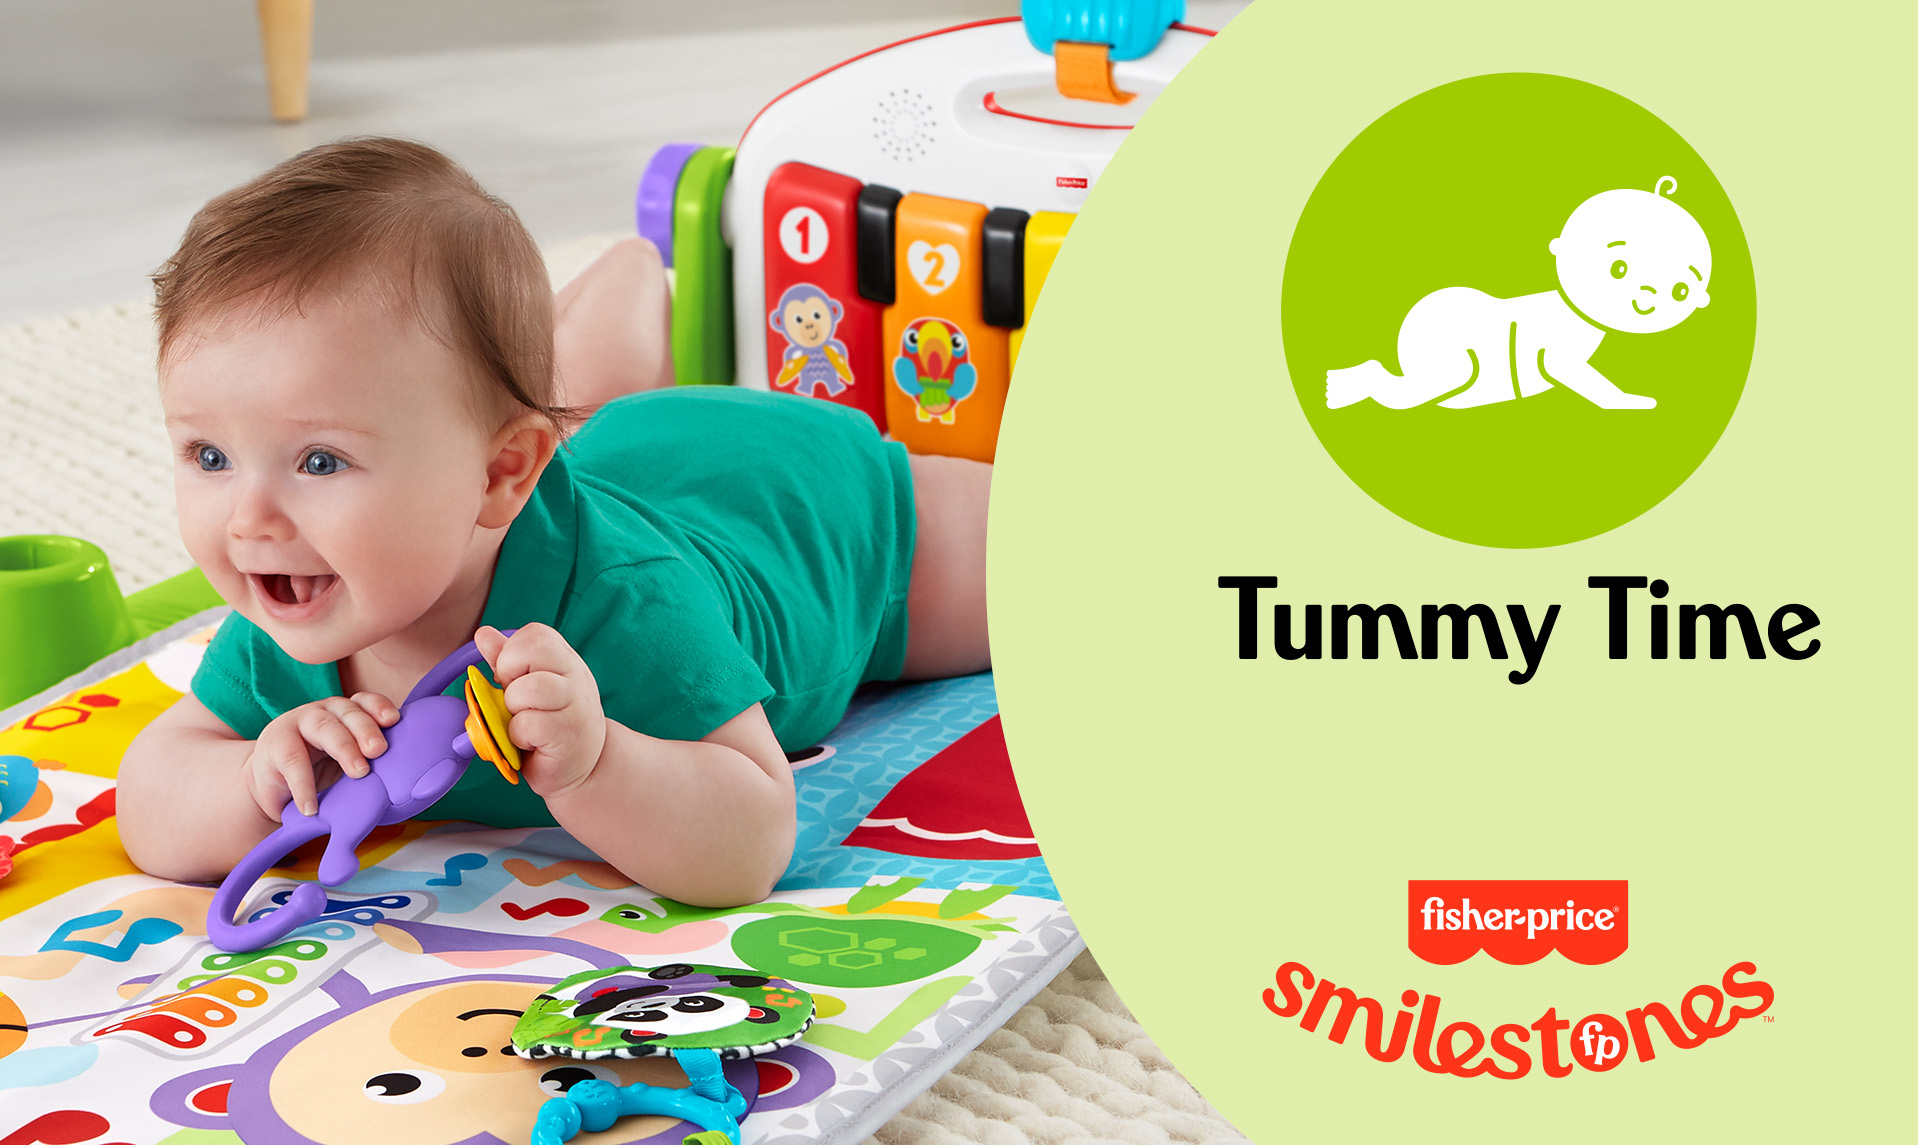 Tummy time: Helping your baby